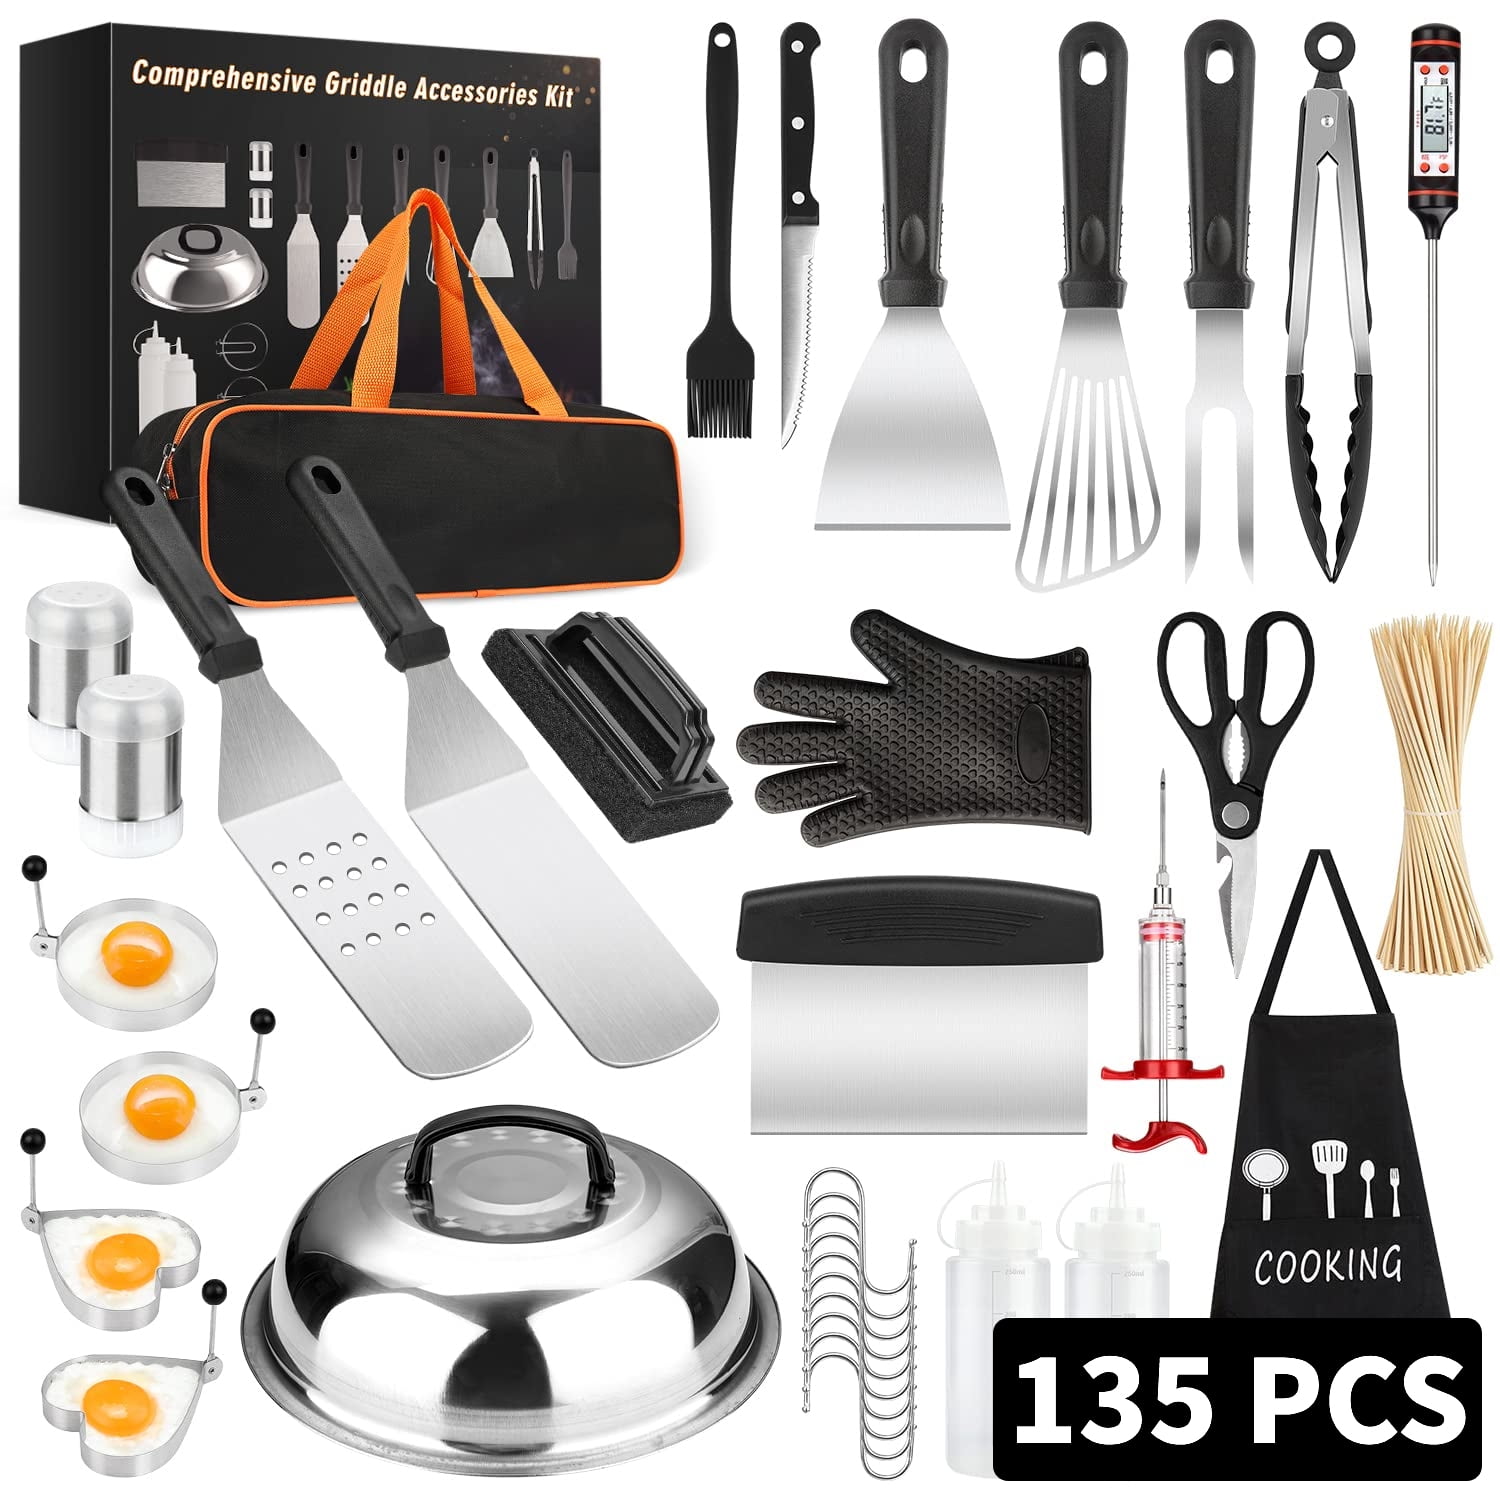 Blackstone 5481 Tabletop 5 Piece Griddle Tool Kit- Outdoor Indoor Grill BBQ